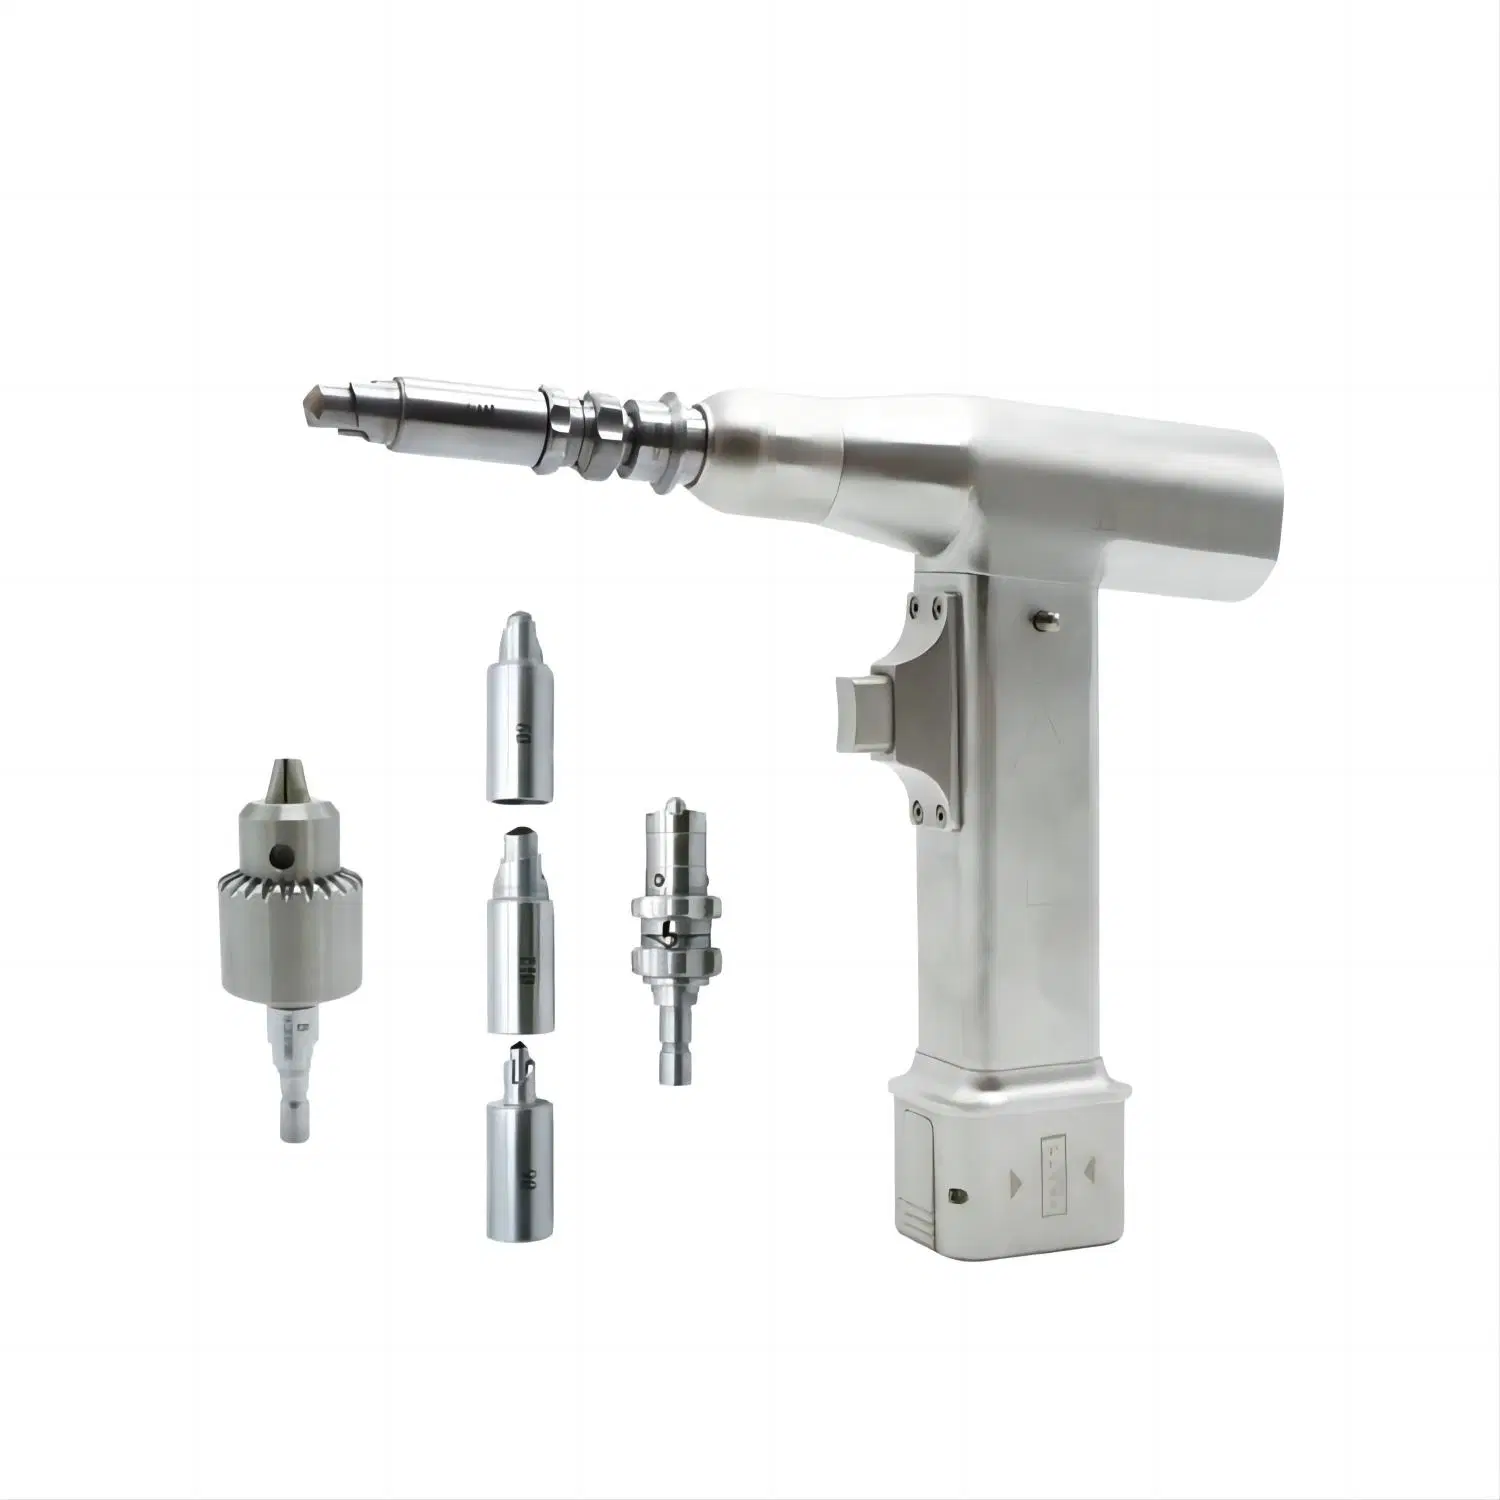 Medical Orthopedic Electric Stainless Steel Cannulated Drill Orthopedic Surgical Power Tool Set